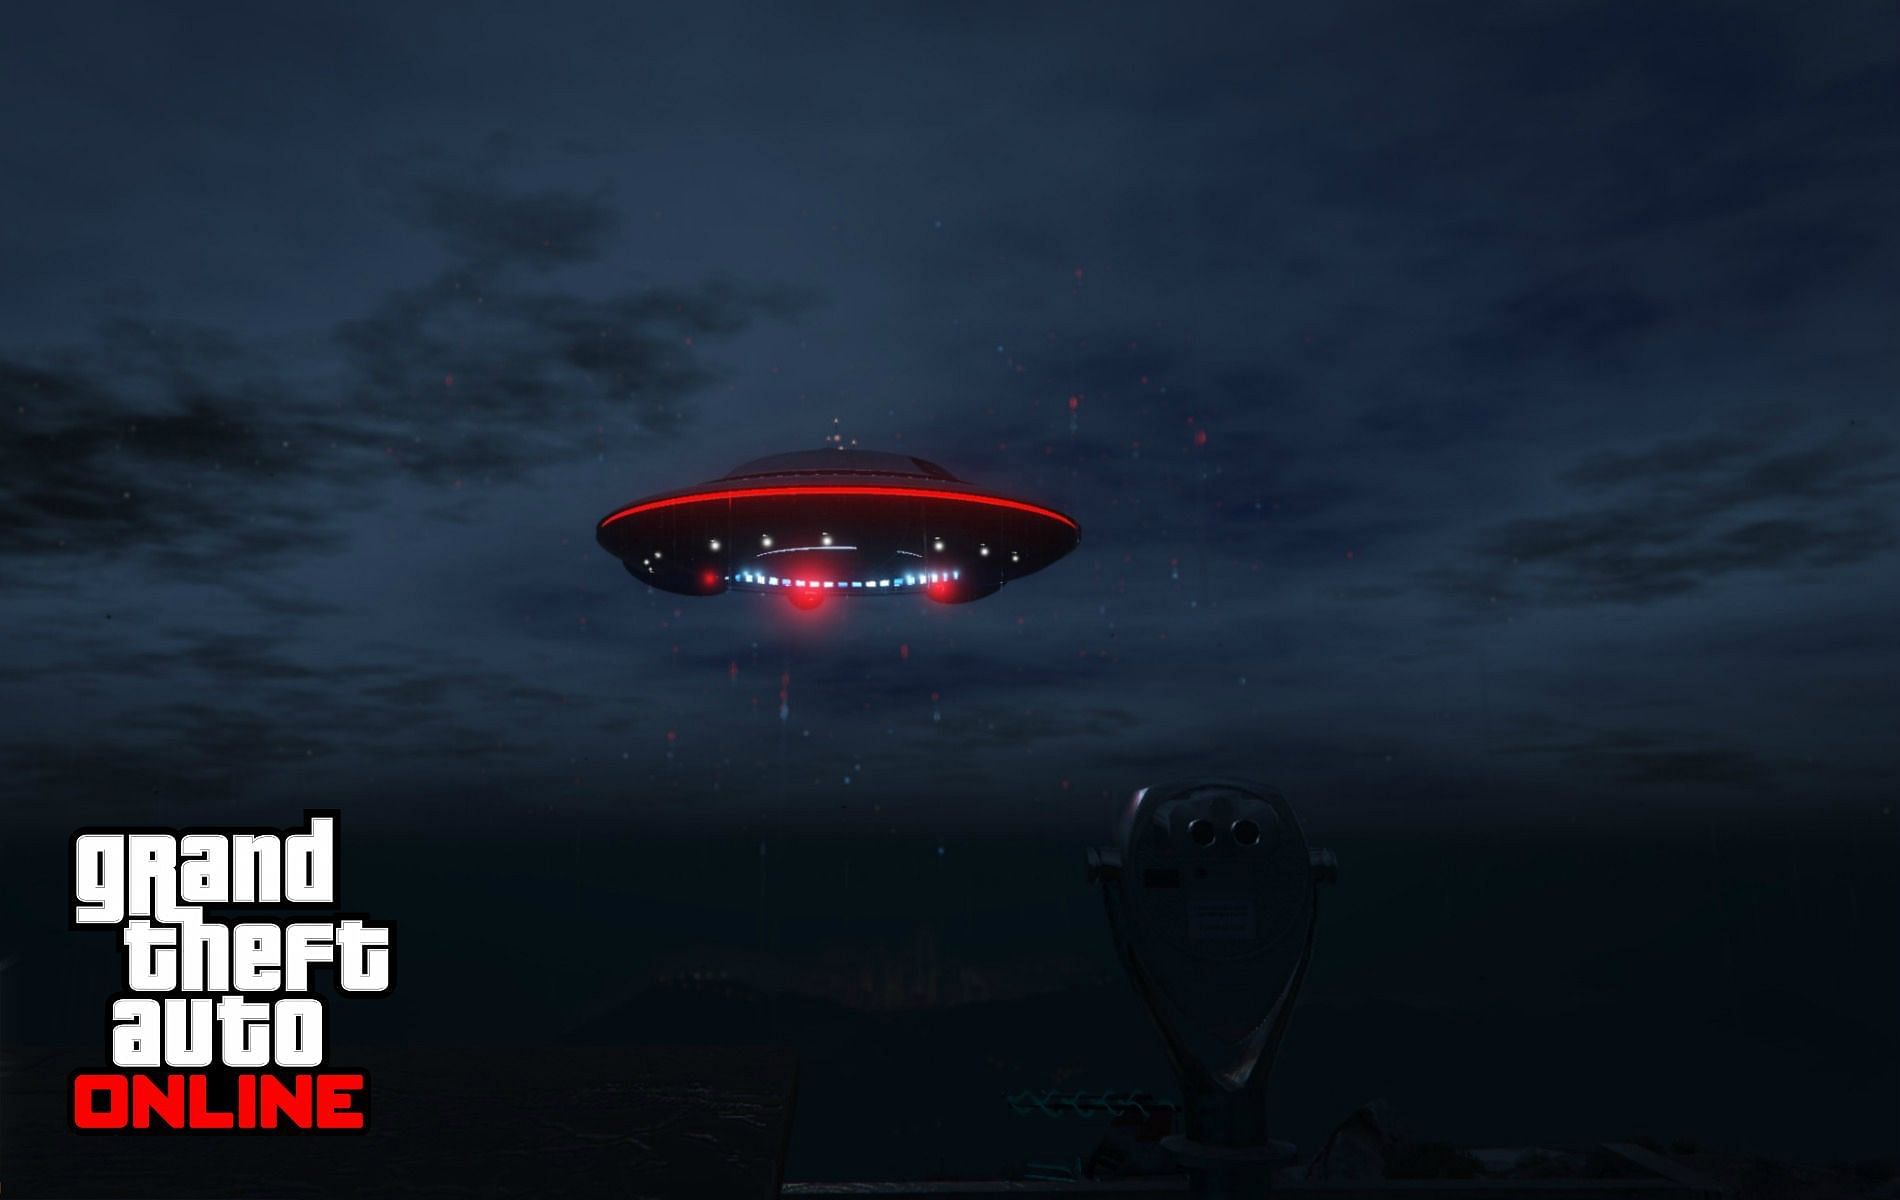 GTA Online players can now spot UFOs in the game (Image via Sportskeeda)